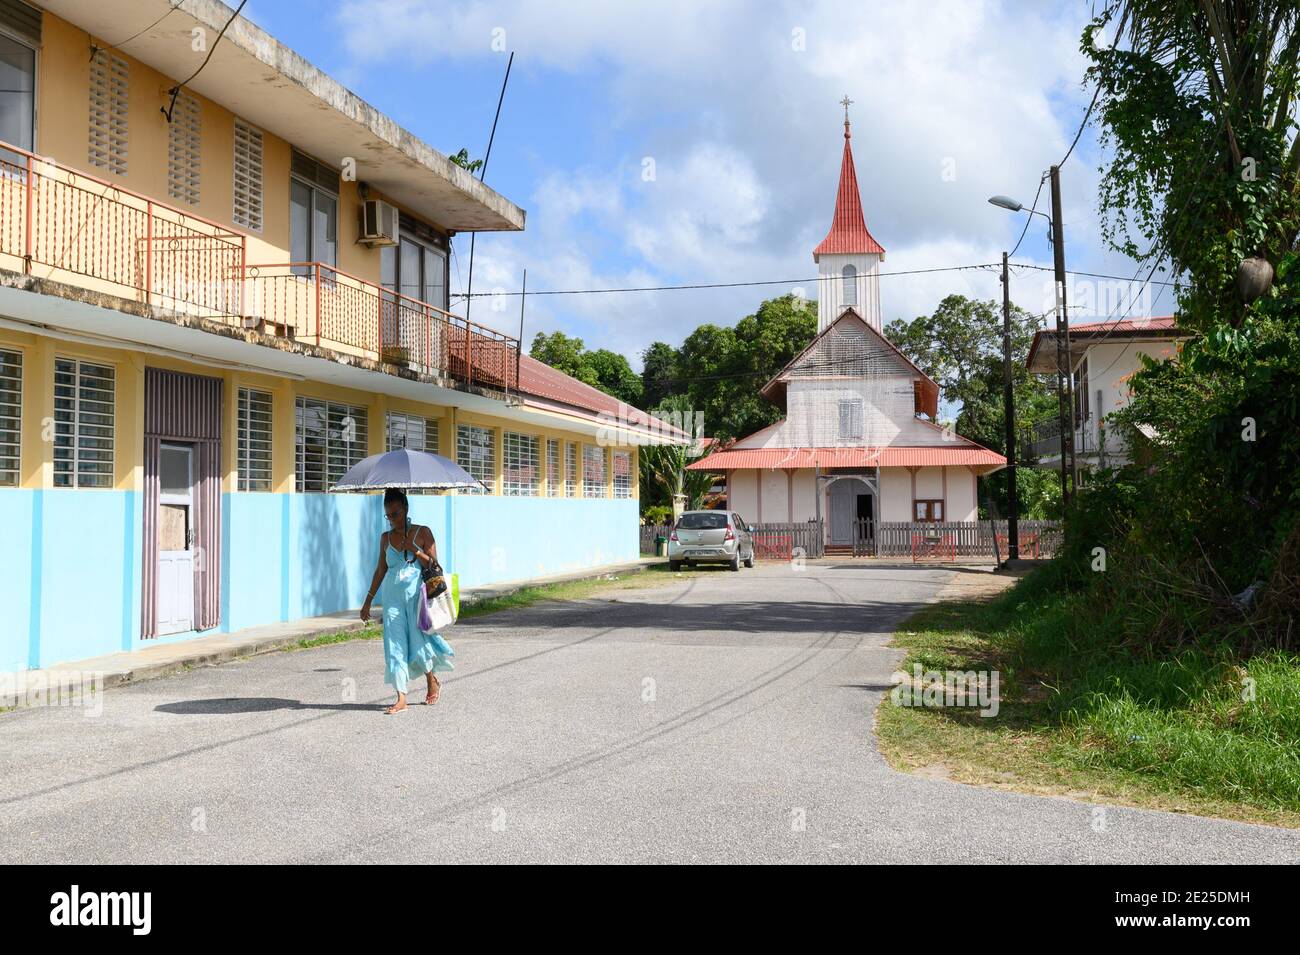 Guyana, Iracoubo: woman wearing a dress walking alone in a street, with the Church of Saint-Joseph in the background *** Local Caption *** Iracoubo; l Stock Photo